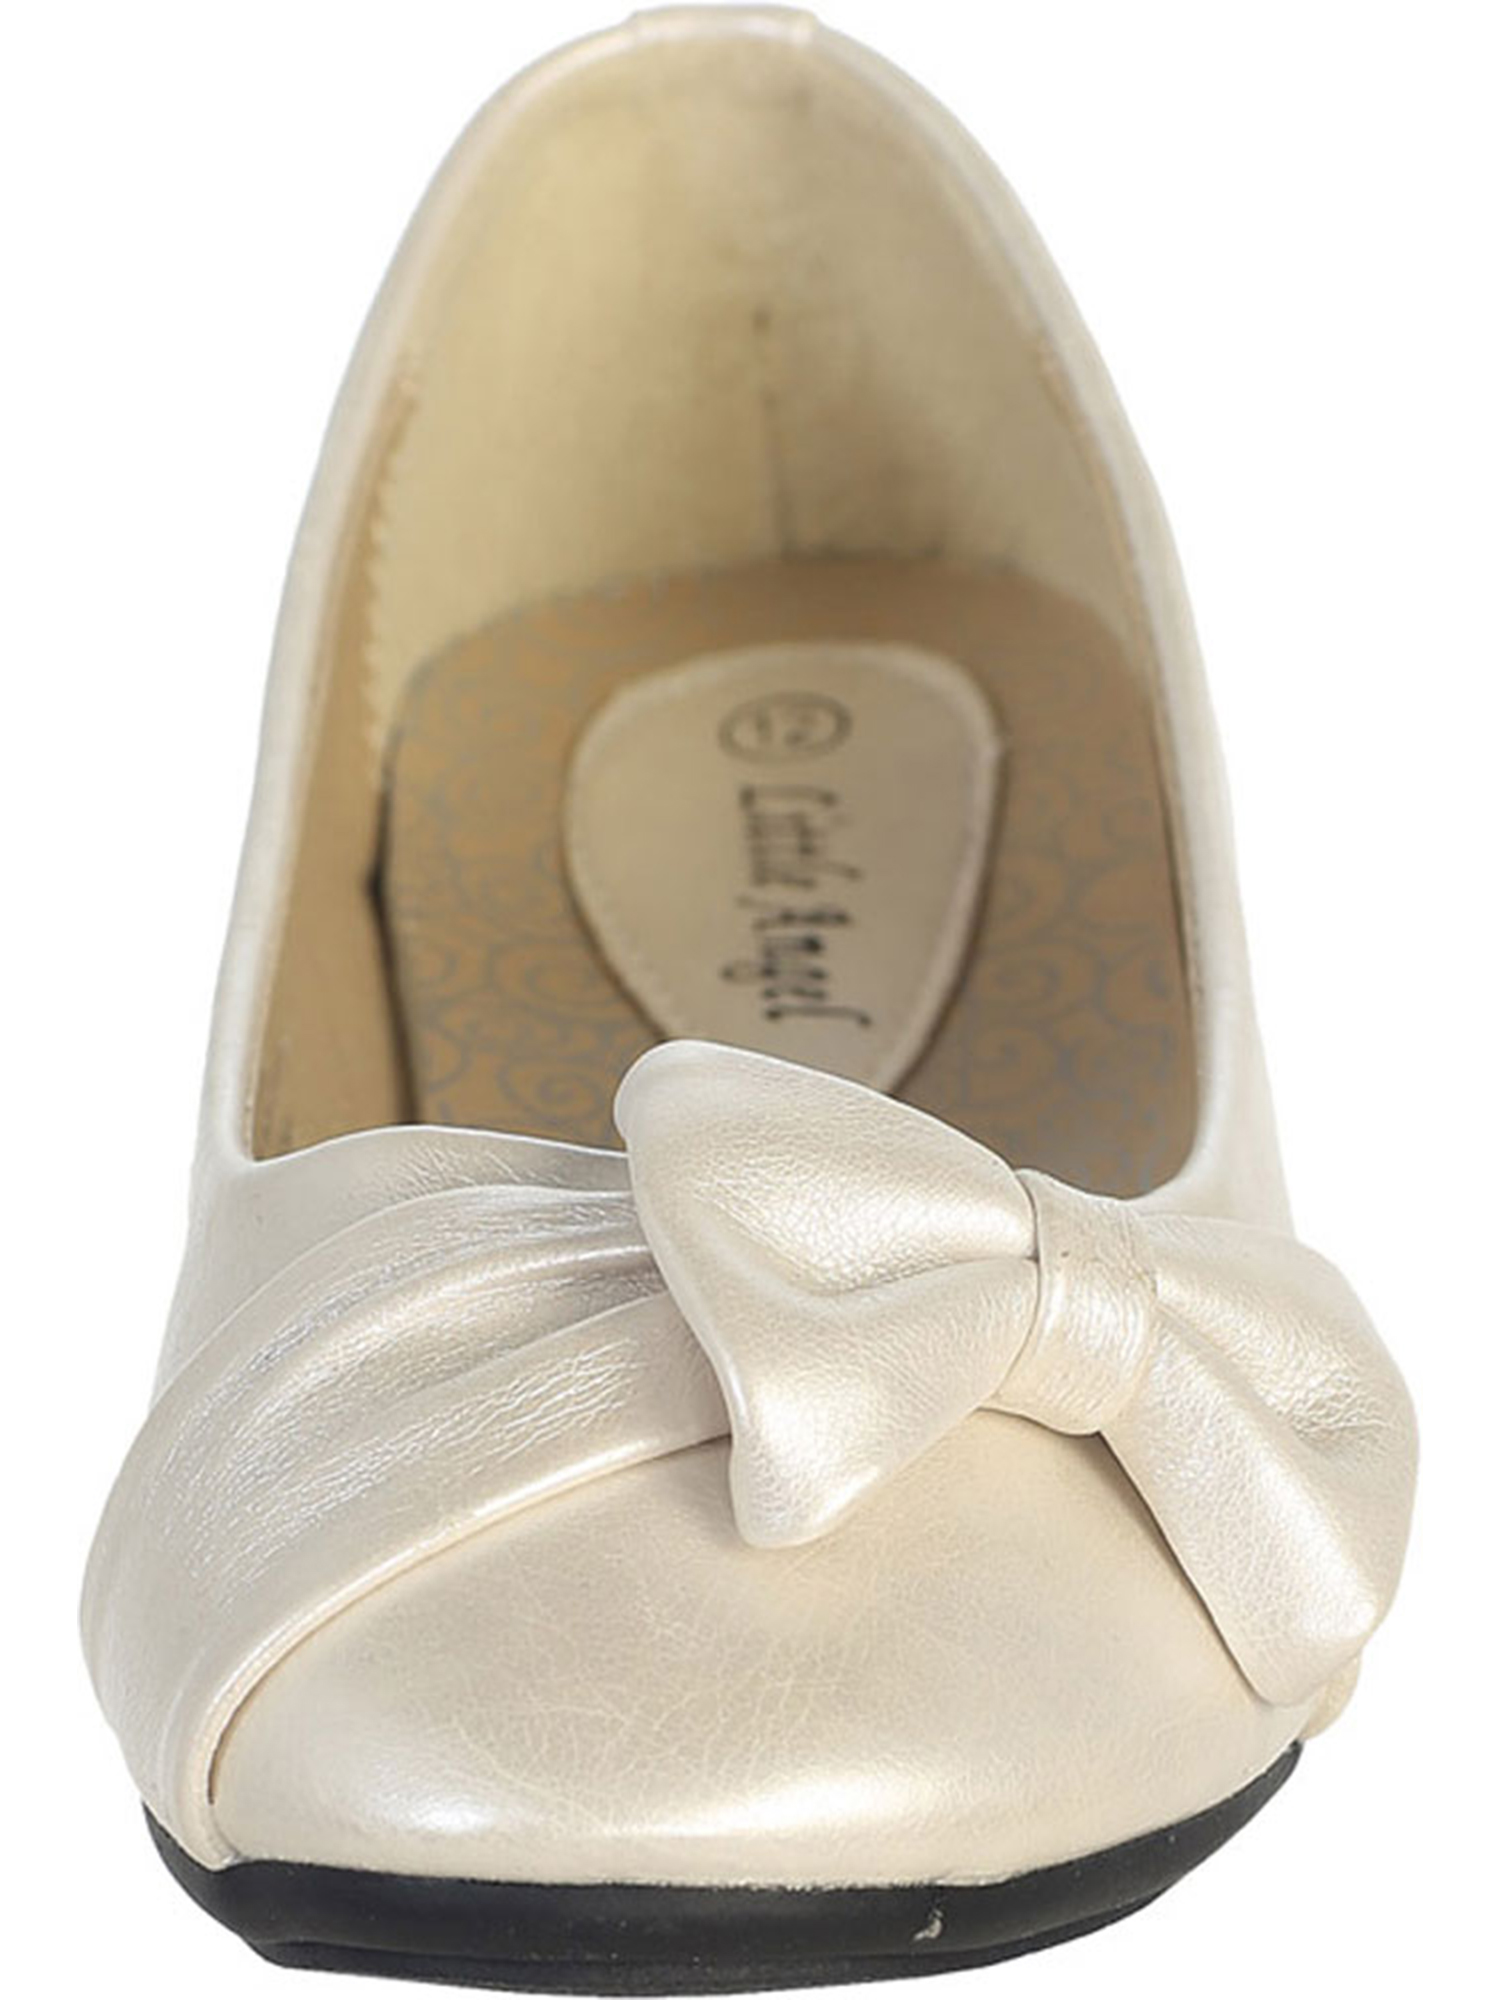 Ivory Pearl Girl's Flat Shoes with Side Bow Girl 10